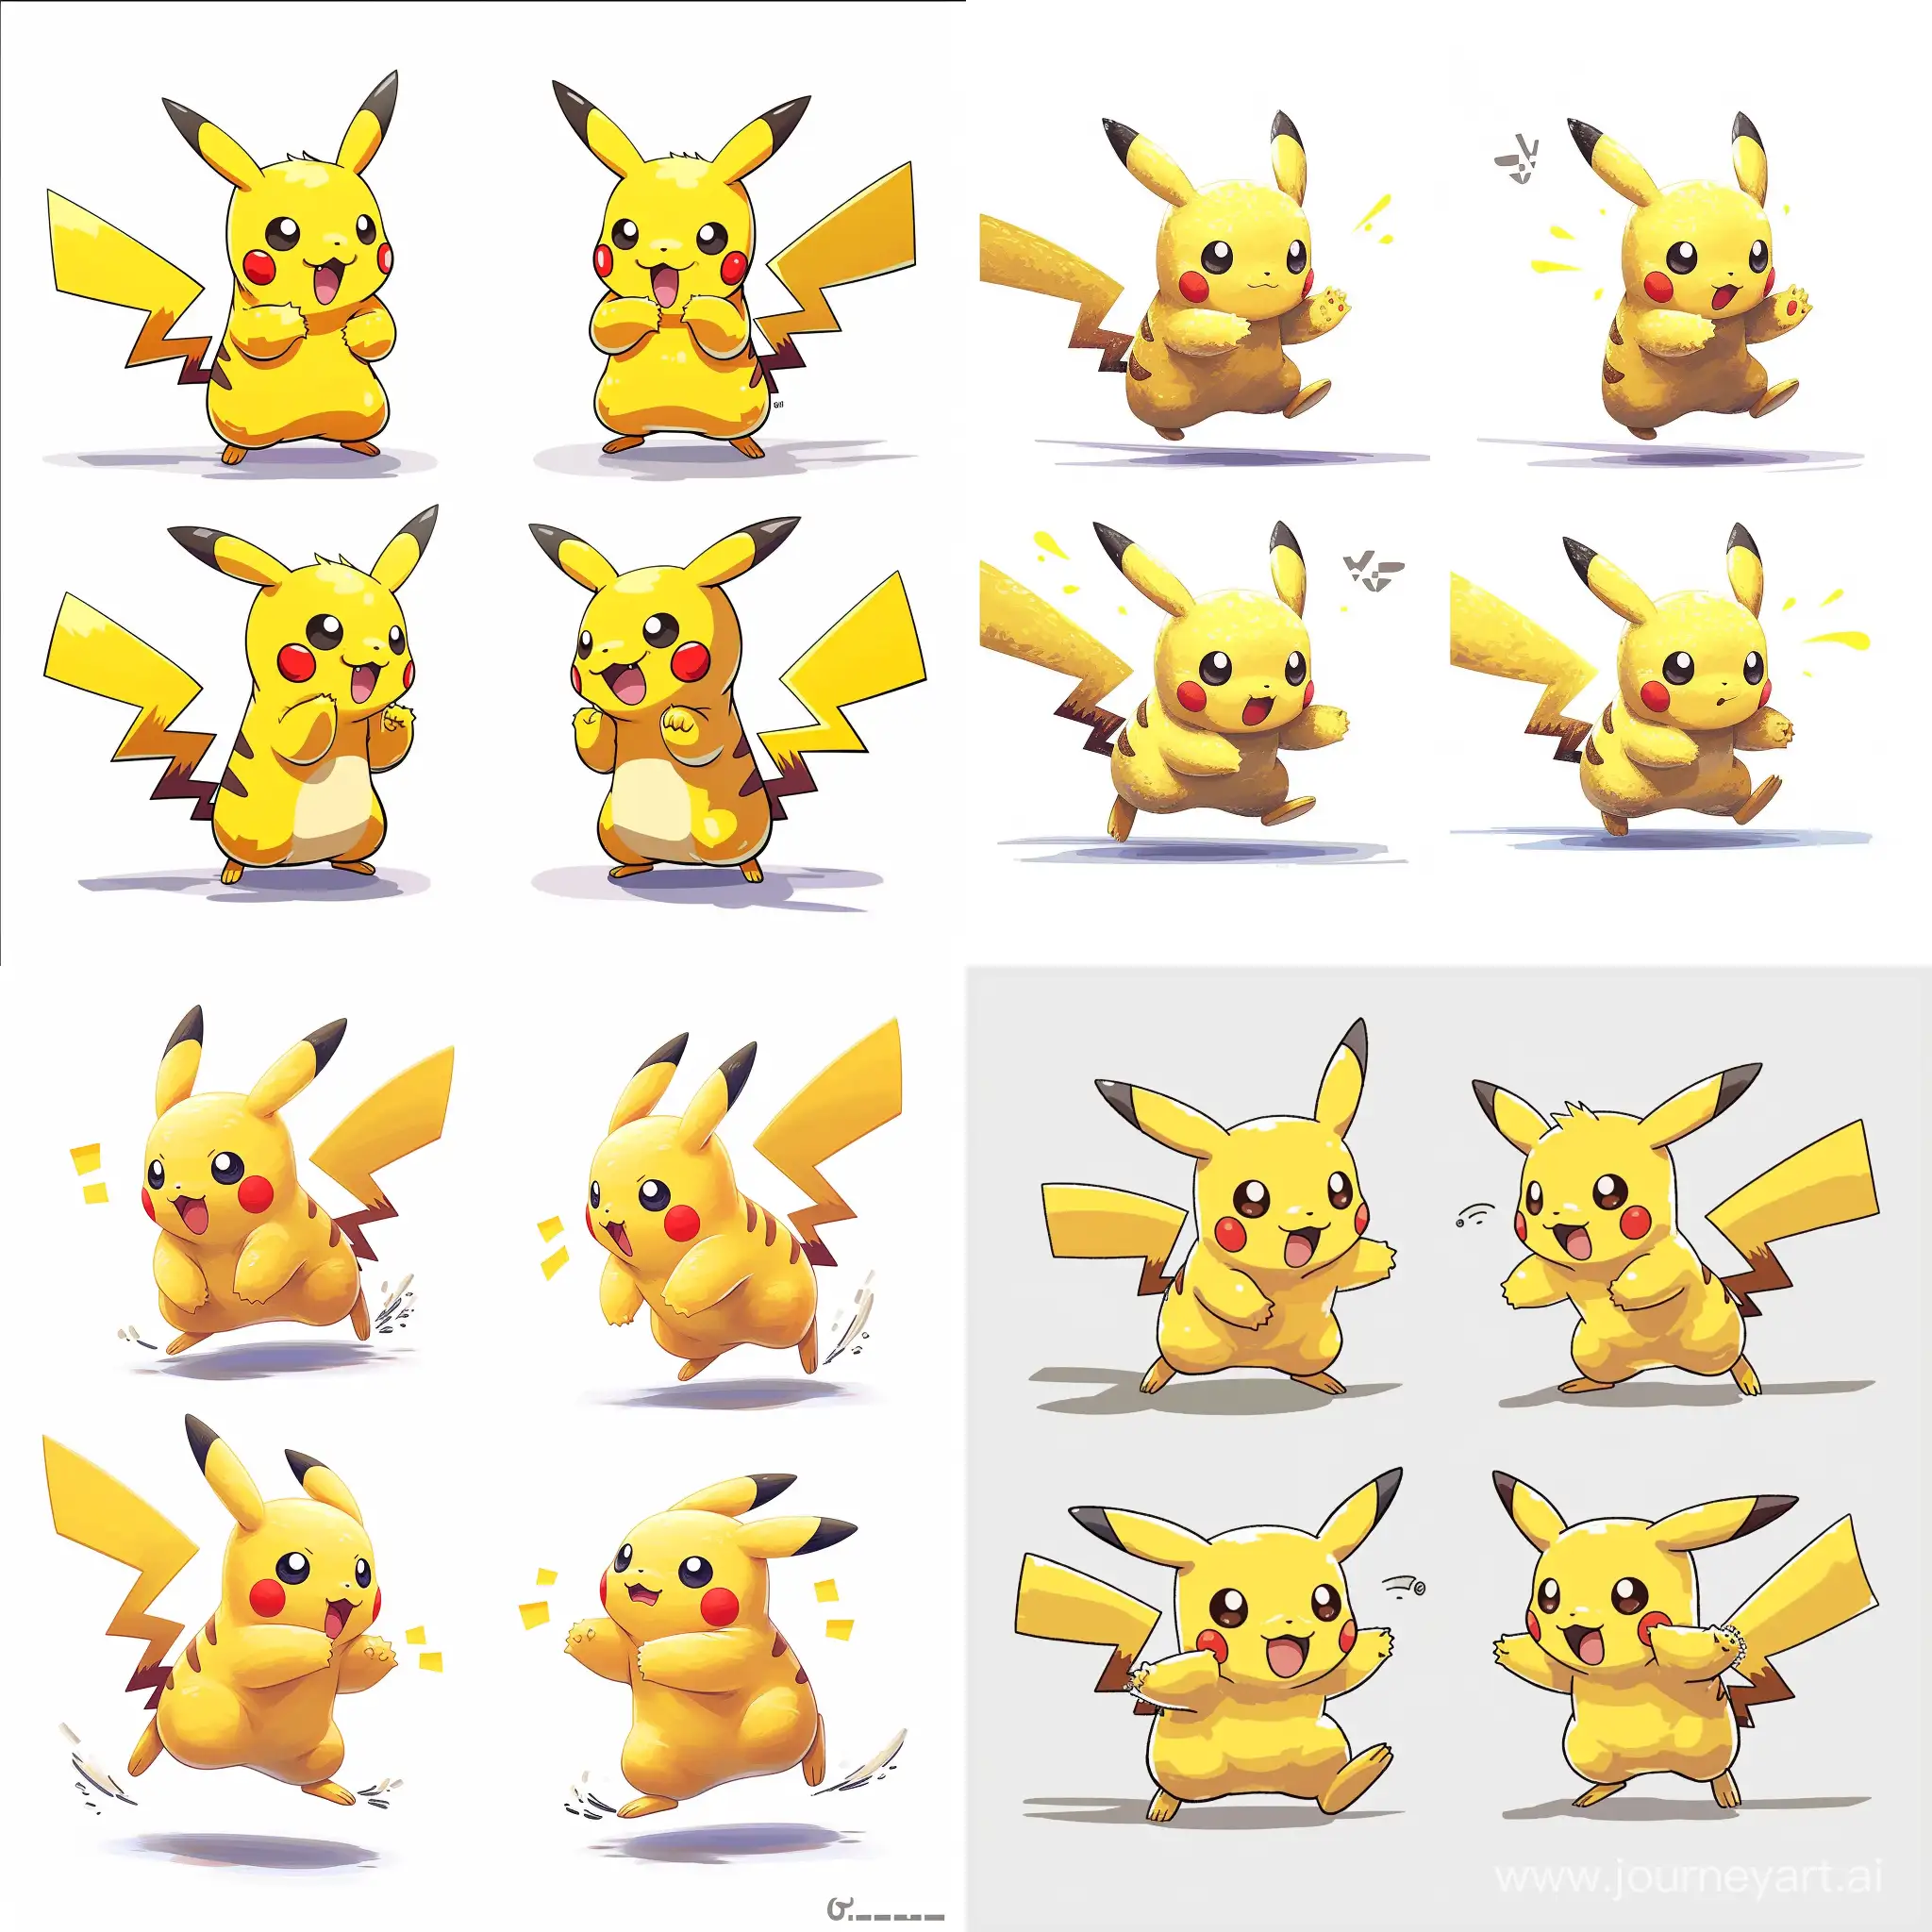 TibiaInspired-Pikachu-Sprites-Dynamic-Movements-in-Four-Directions